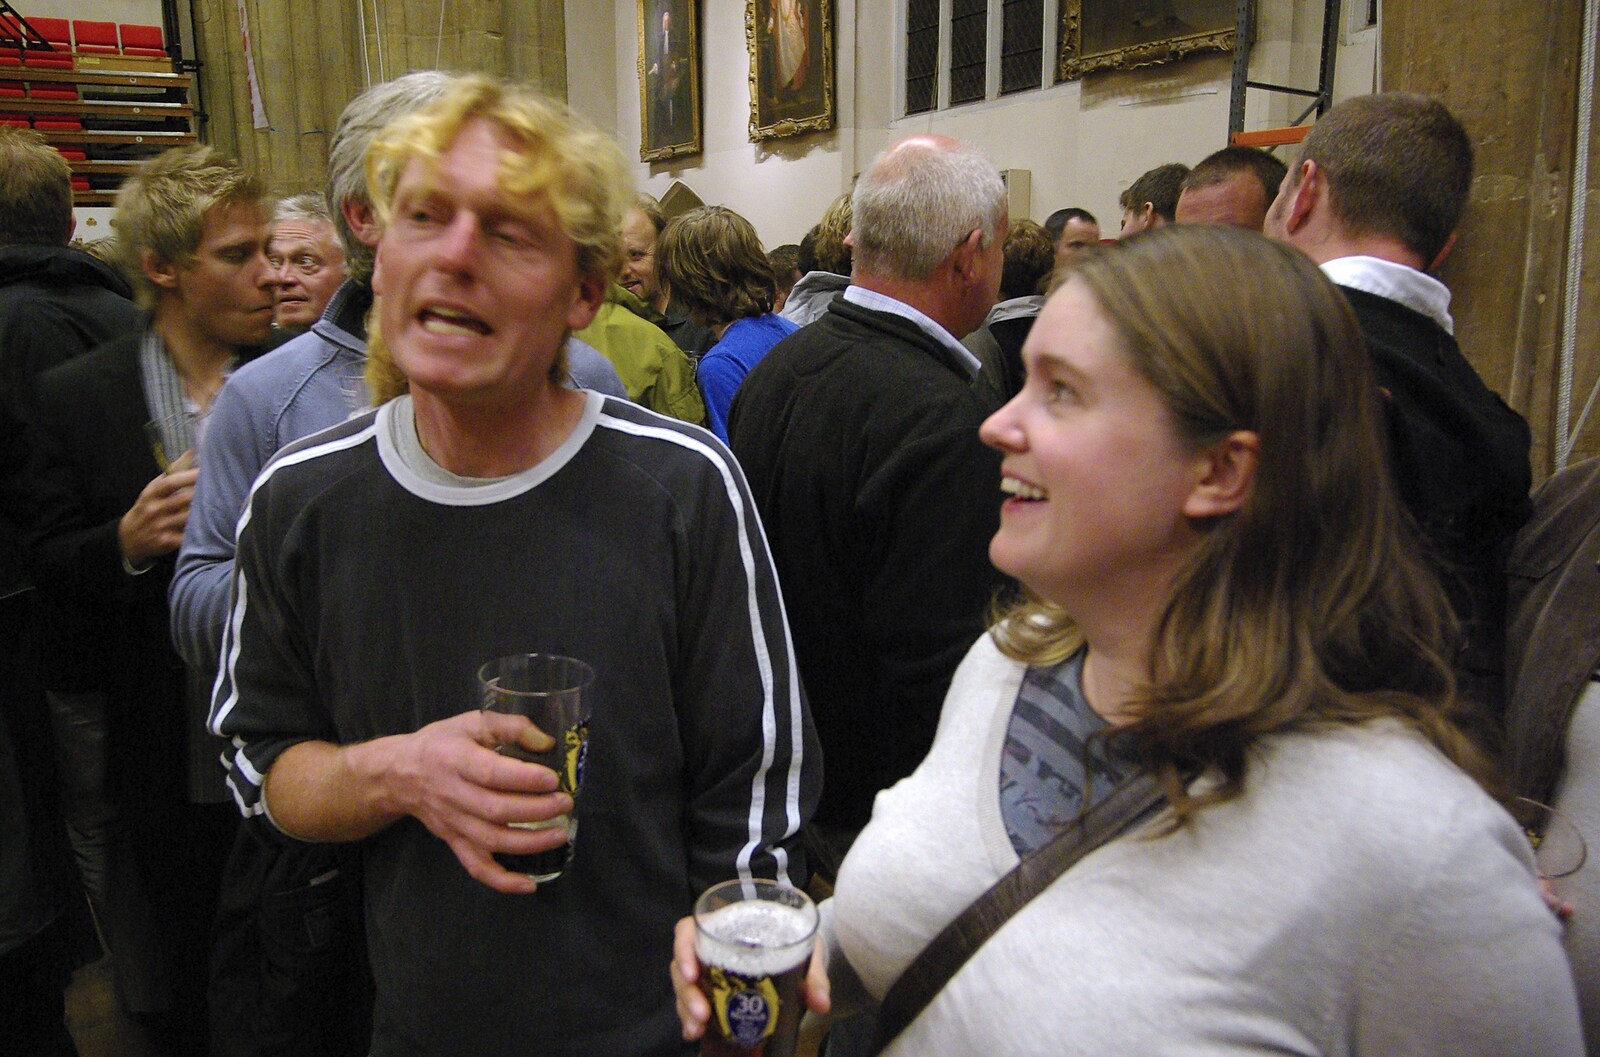 The 30th Norwich Beer Festival, St. Andrew's Hall, Norfolk - 24th October 2007: Wavy and Isobel